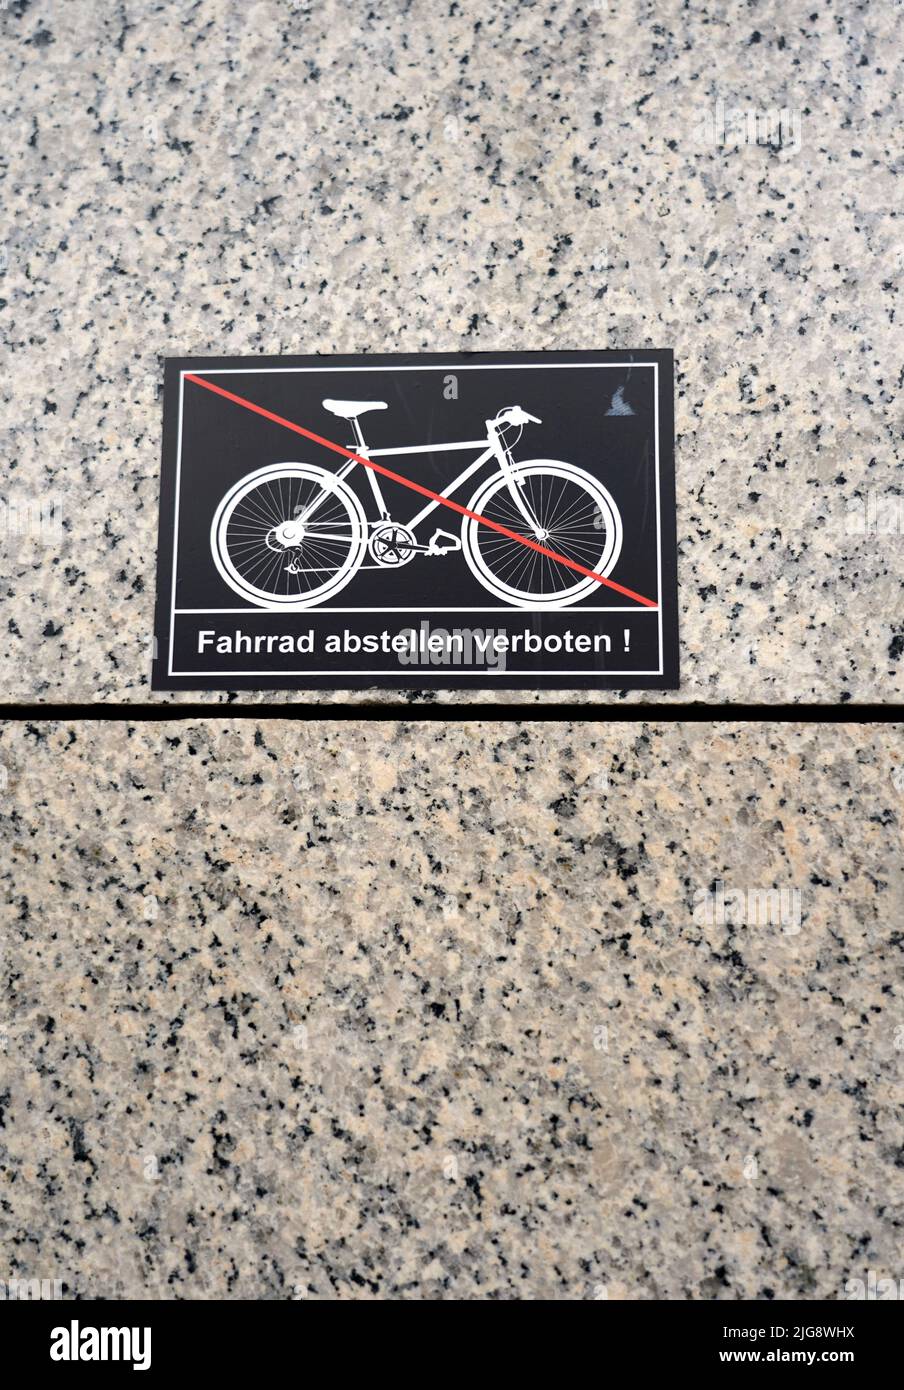 Germany, Bavaria, Munich, building, prohibition sign, bicycle parking prohibited, marble cladding of a business building Stock Photo